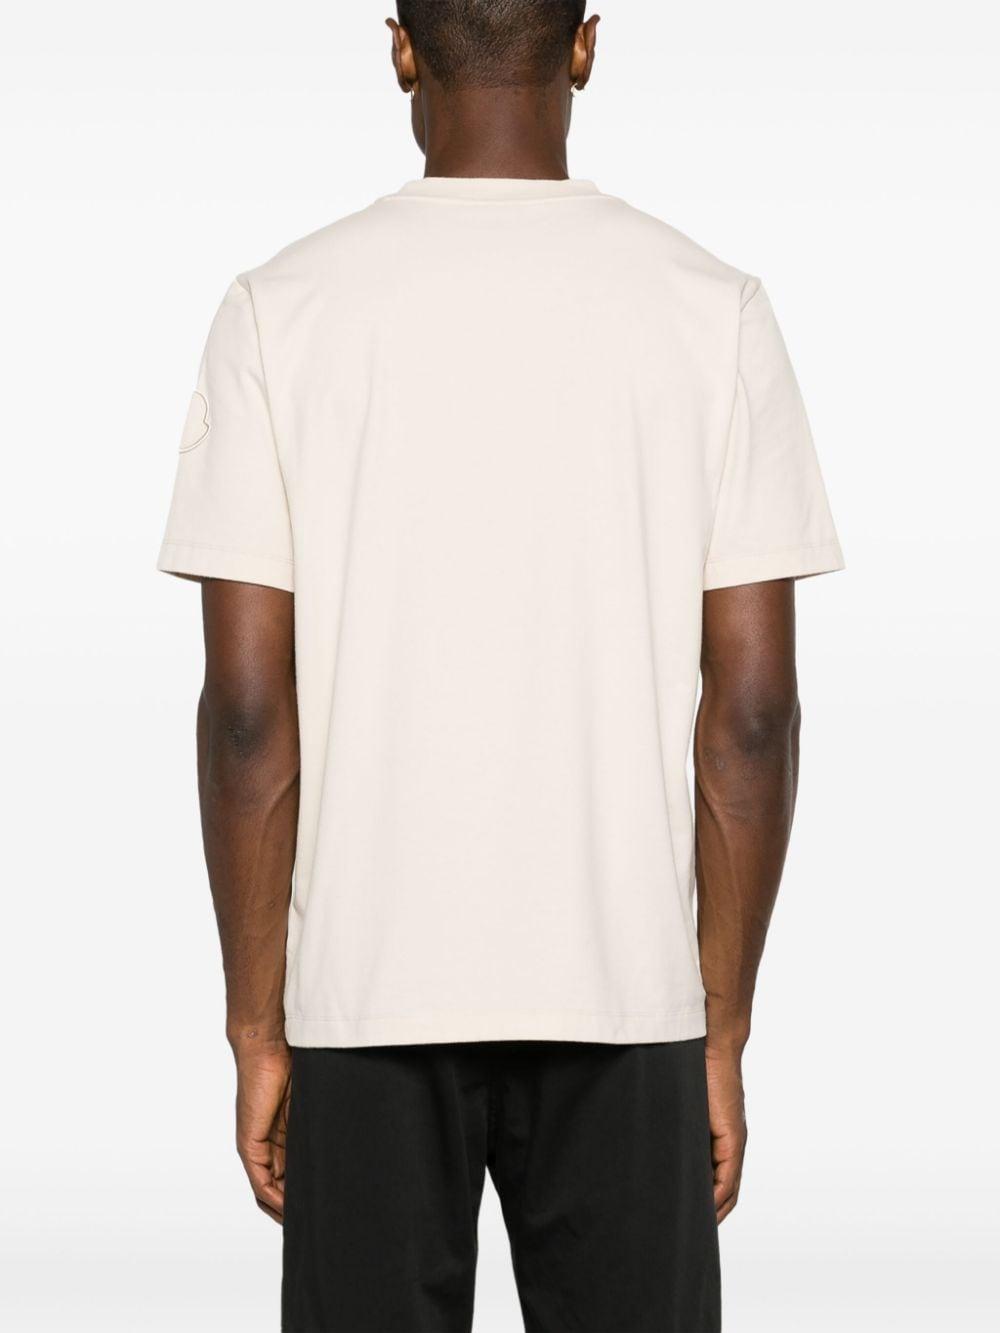 Moncler logo-embroidered T-shirt - Farfetch